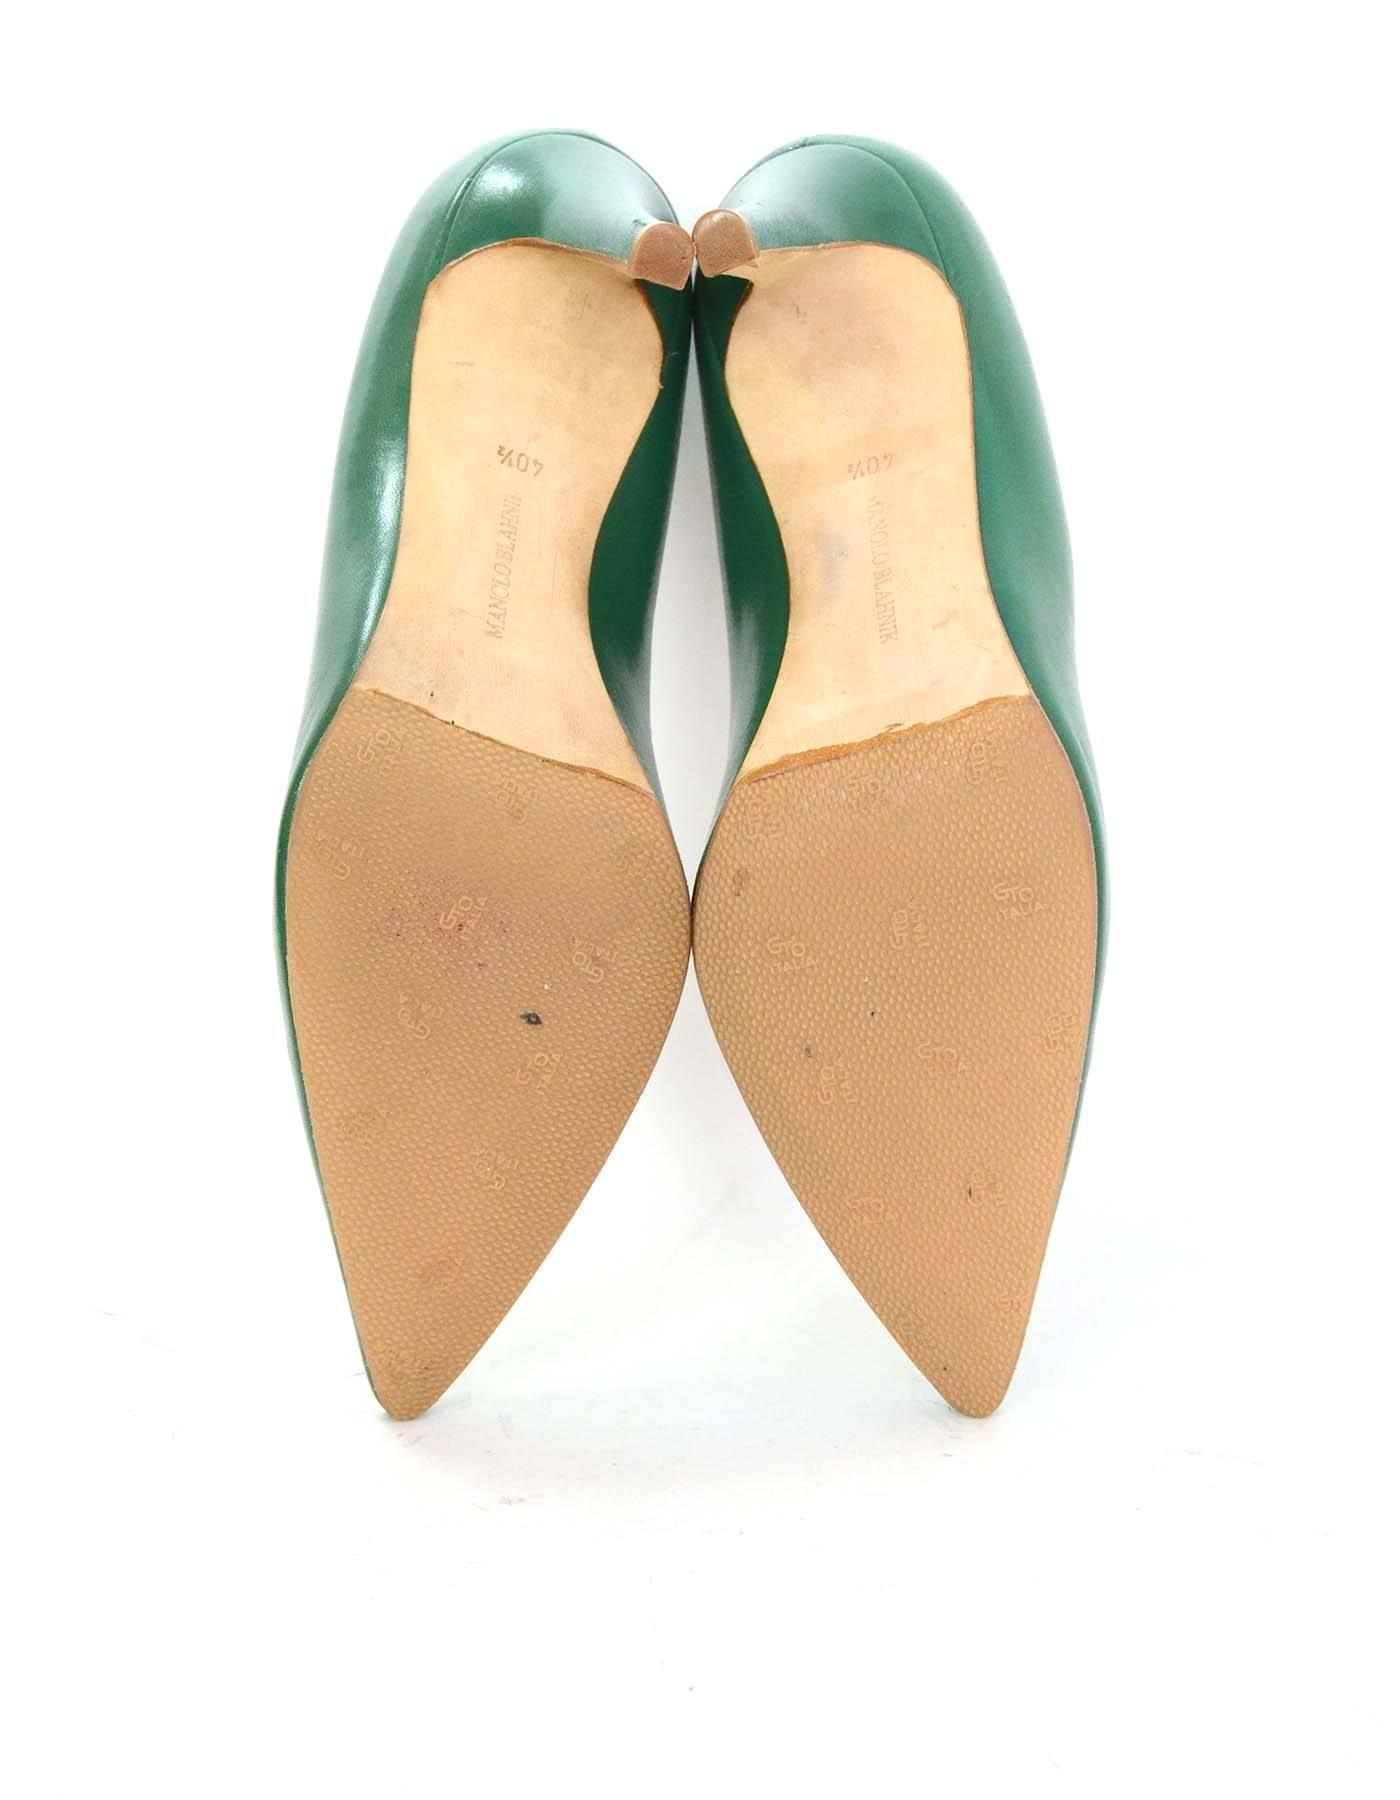 Manolo Blahnik Green Leather Pointed Pumps Sz 40.5 2